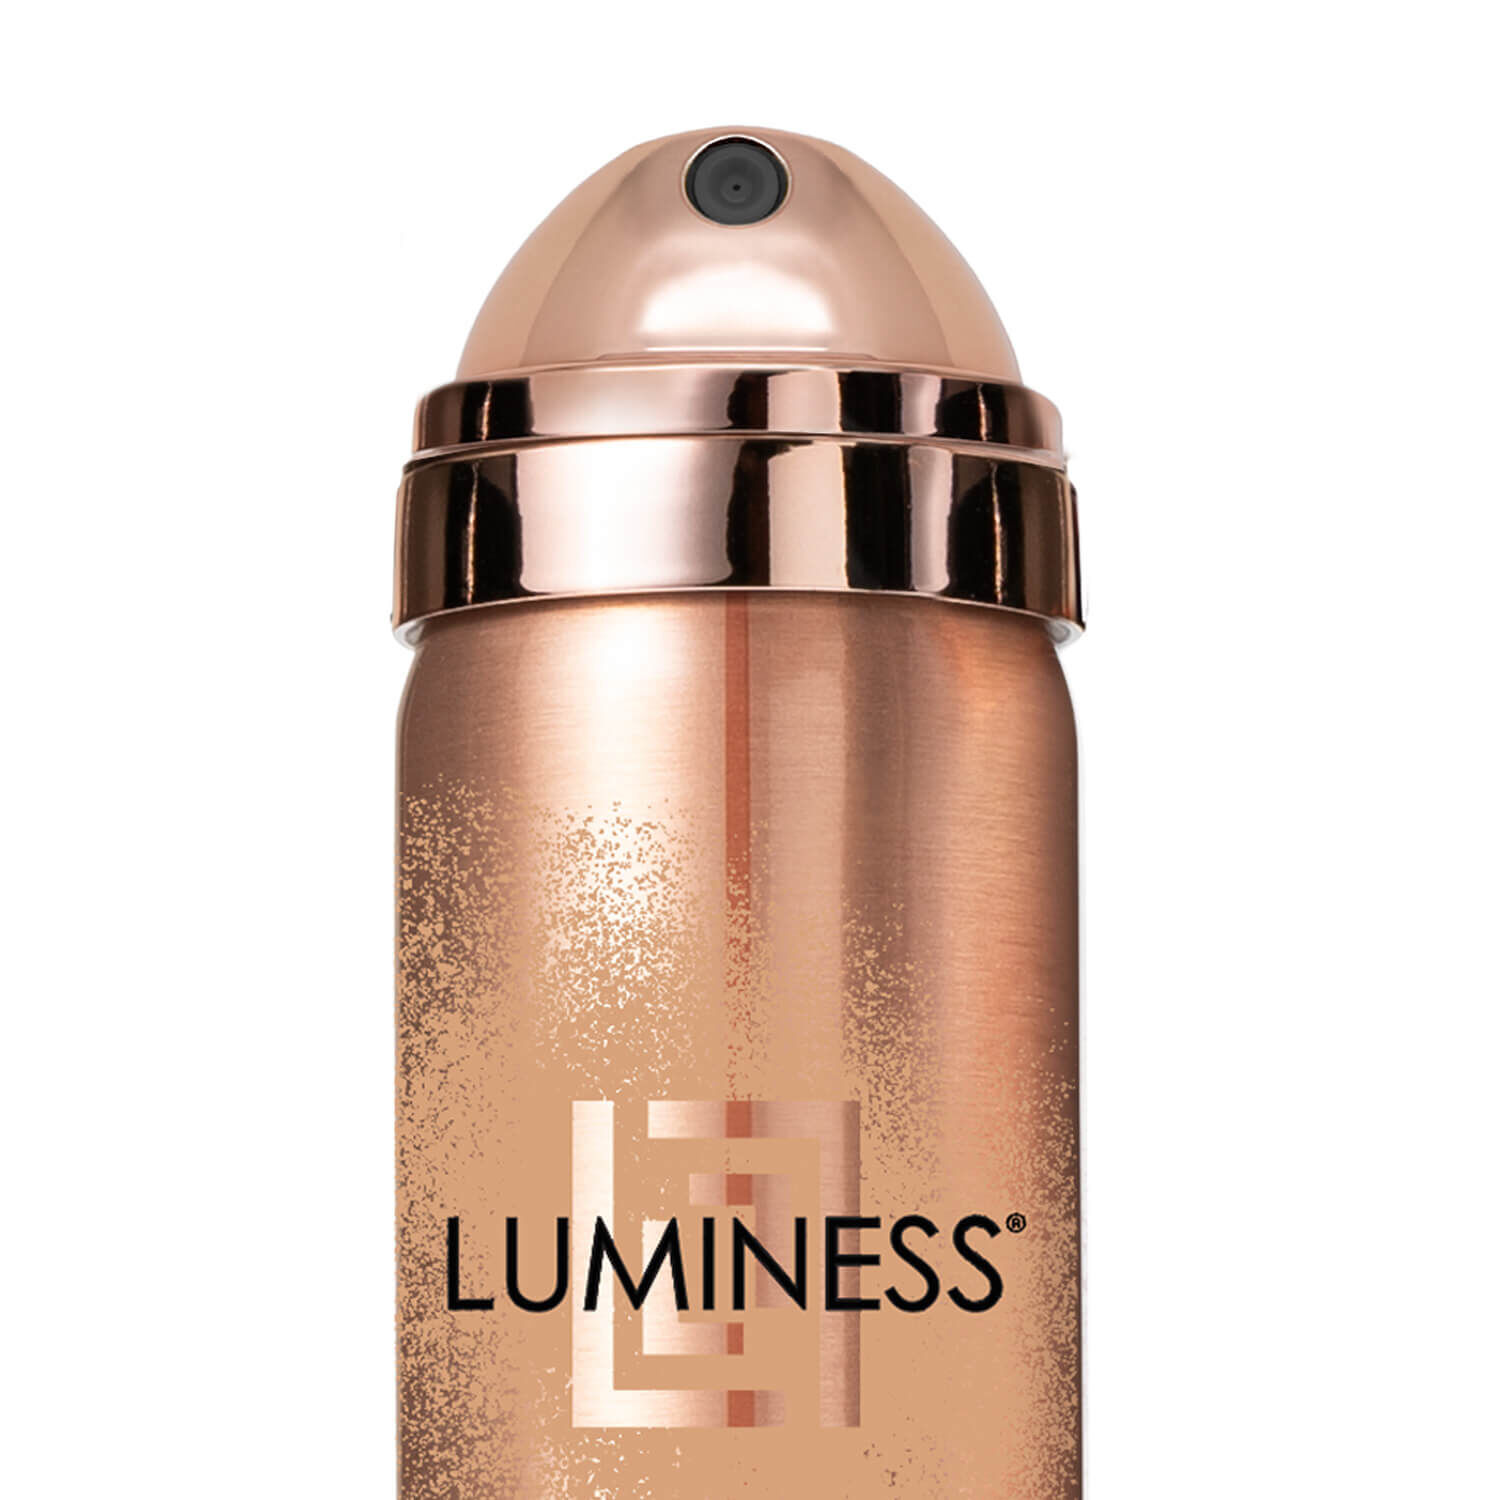  Luminess Air Silk 4-In-1 Airbrush Foundation- Foundation,  Shade 120 - Sheer to Medium Coverage - Anti-Aging Formula Hydrates and  Moisturizes - 0.5 Fl Oz (Pack of 1) : Beauty & Personal Care